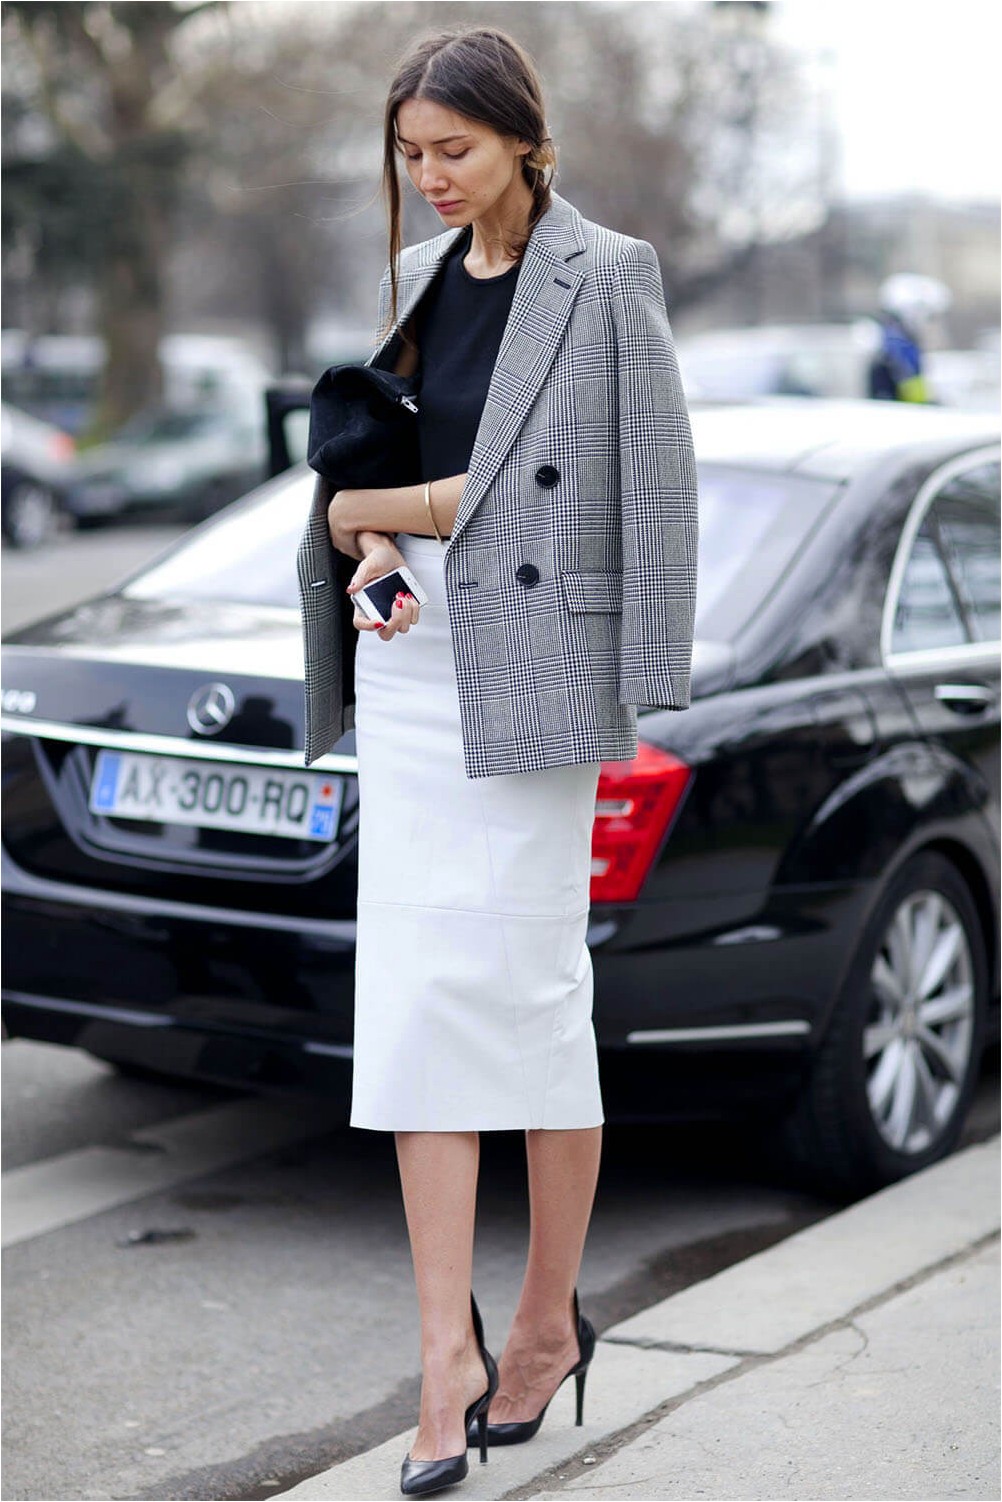 Business style with pencil skirt.